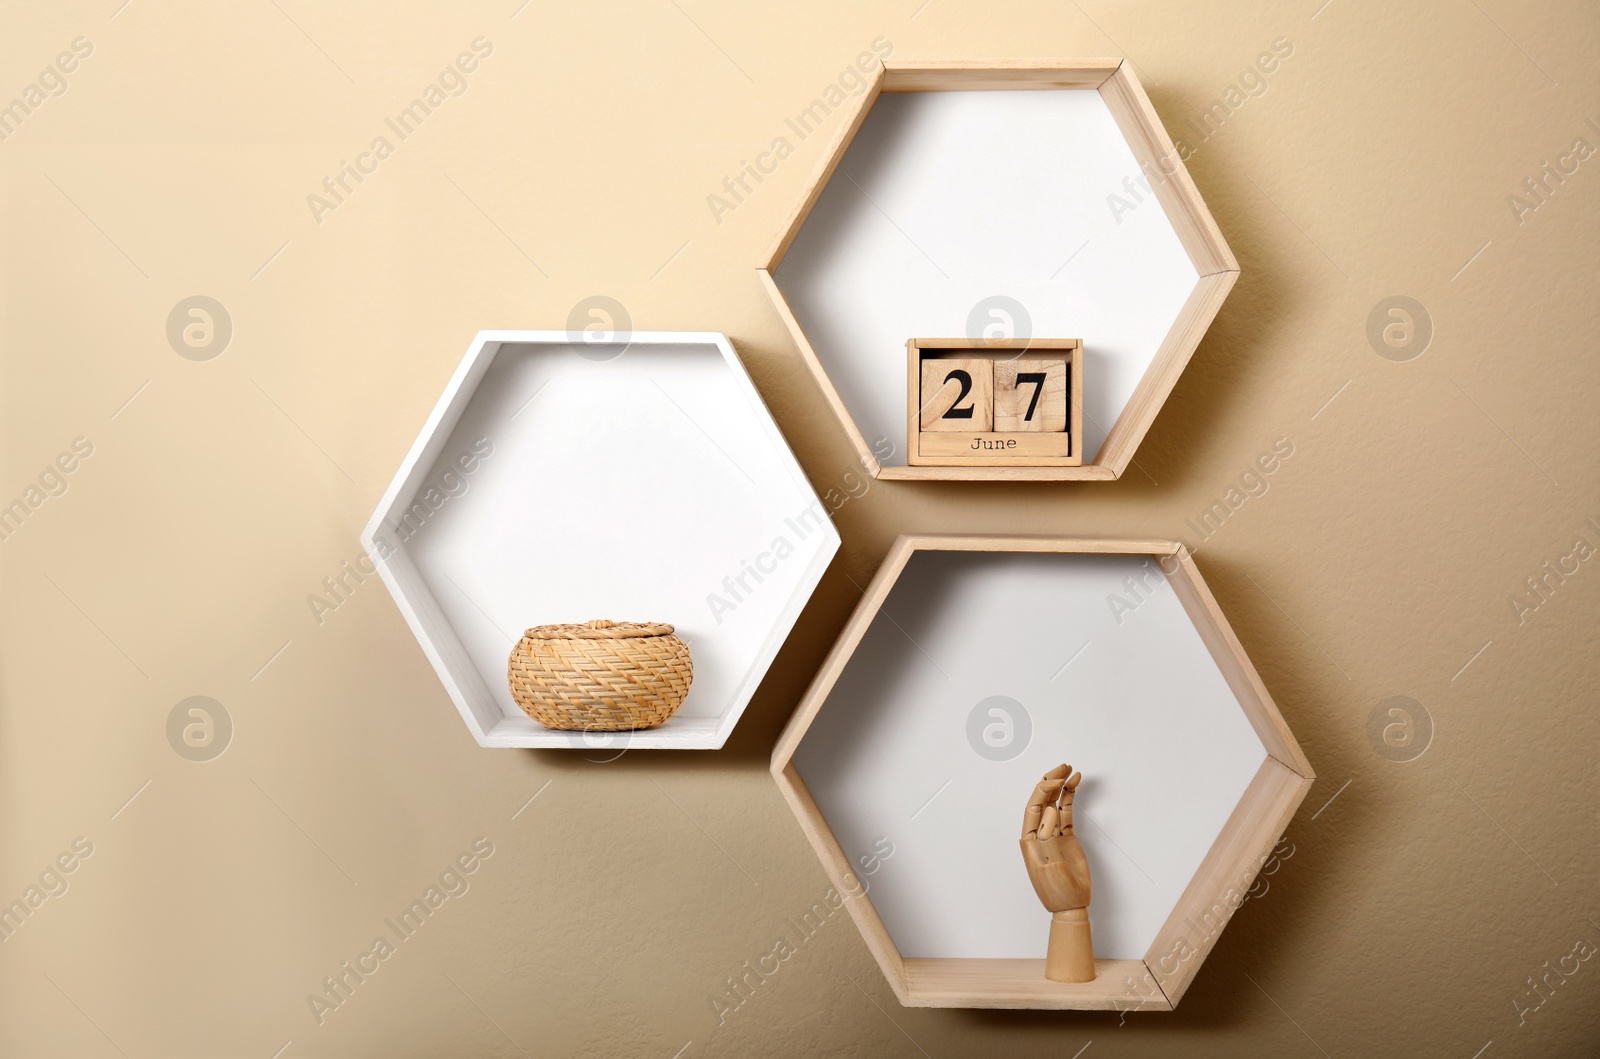 Photo of Honeycomb shaped shelves with decorative elements on beige wall